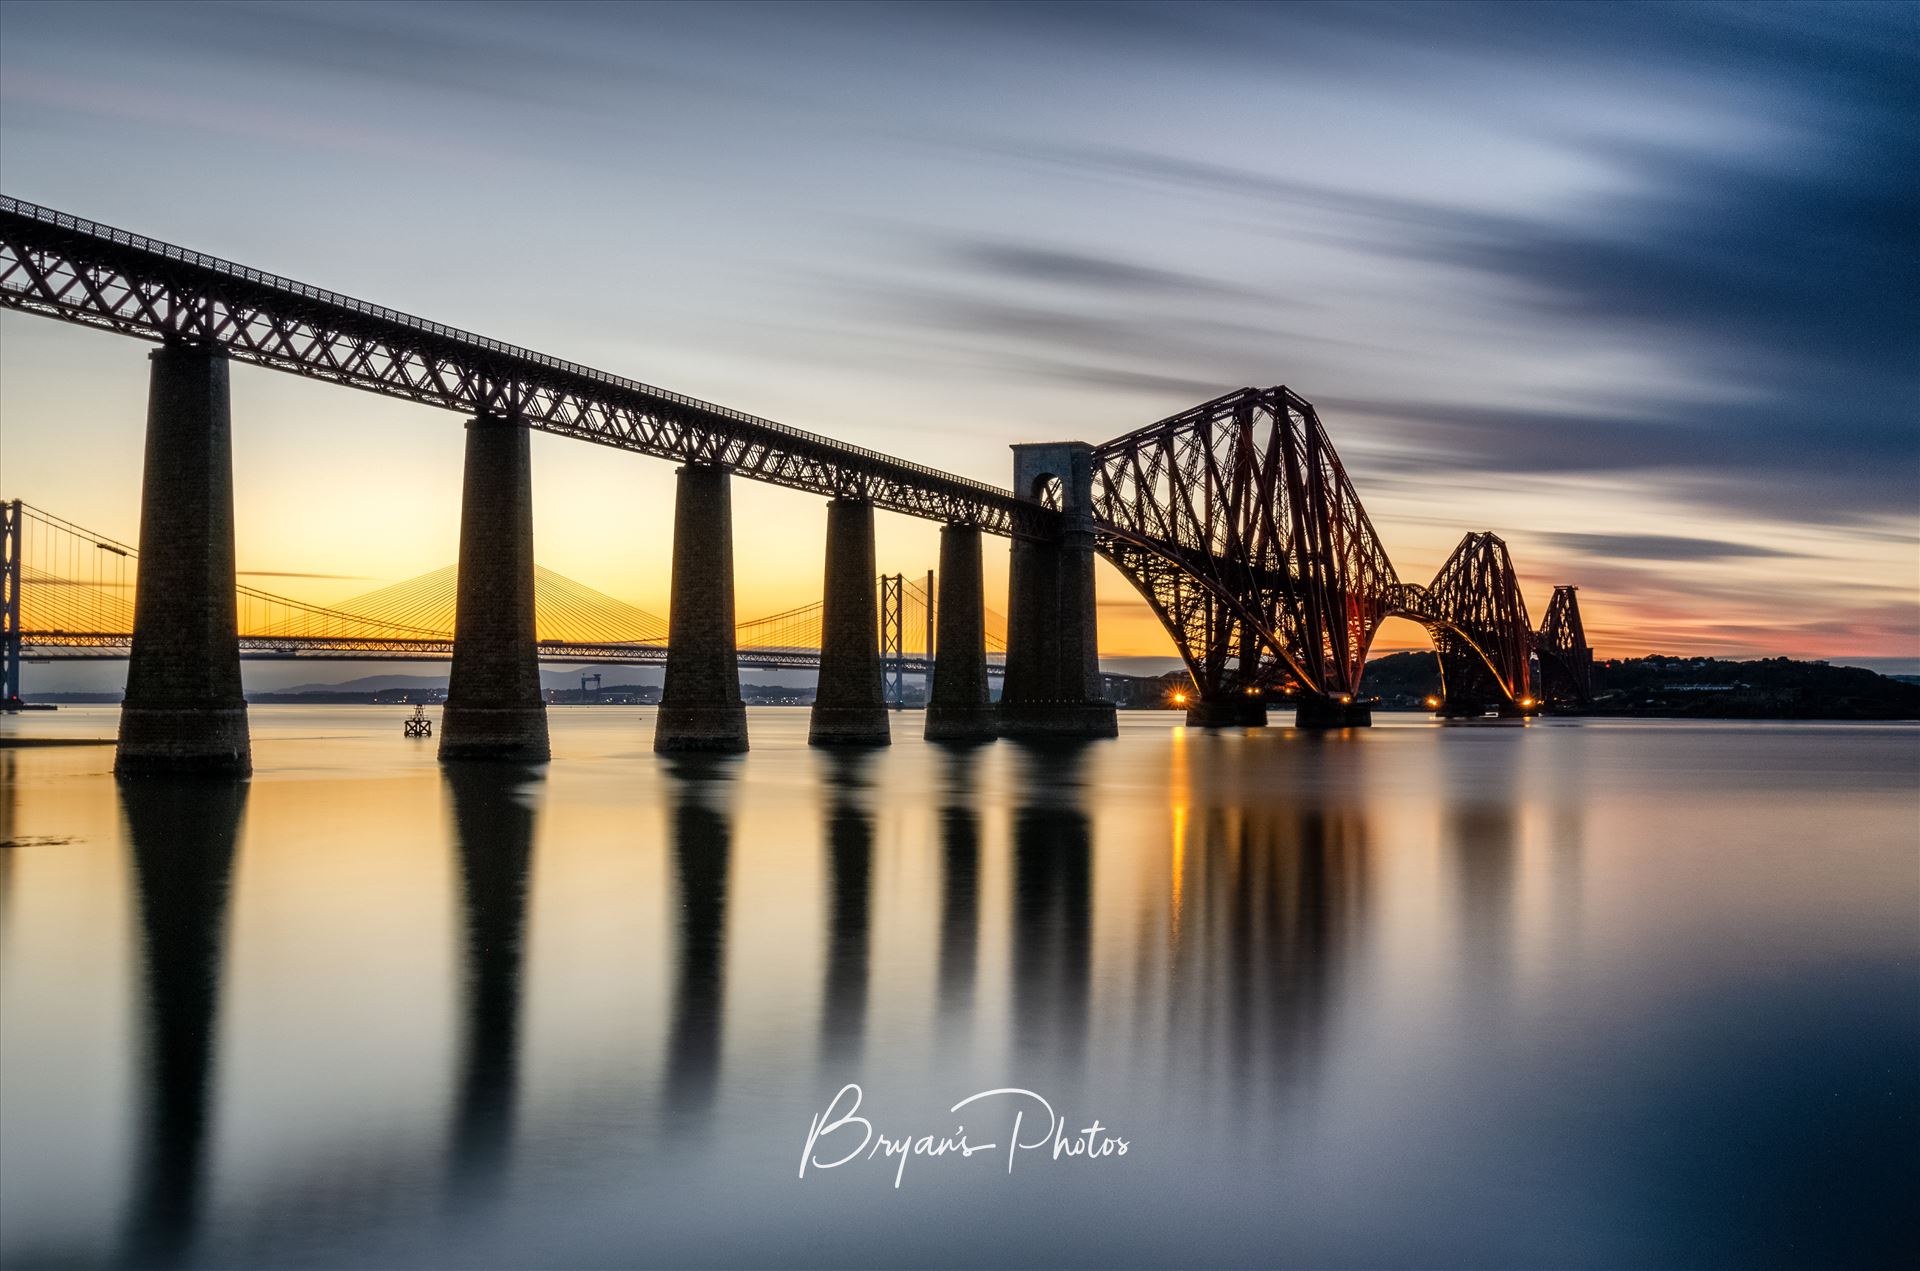 The Bridge after Sunset A long exposure photograph of the Forth Rail Bridge taken shortly after sunset. by Bryans Photos